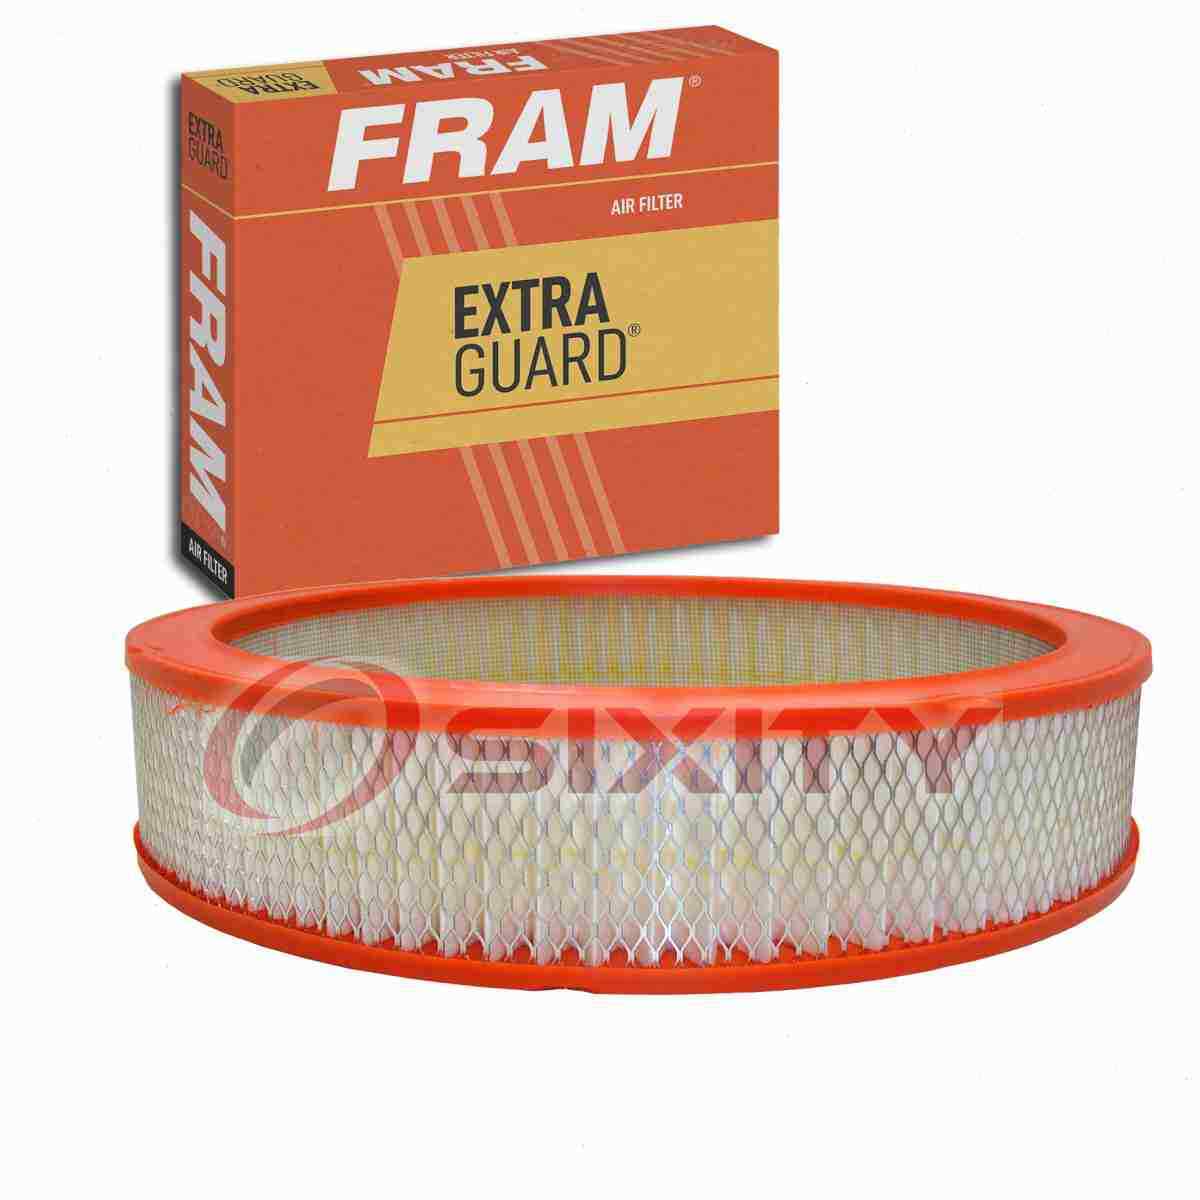 FRAM Extra Guard Air Filter for 1965-1968 Pontiac Beaumont Intake Inlet dr